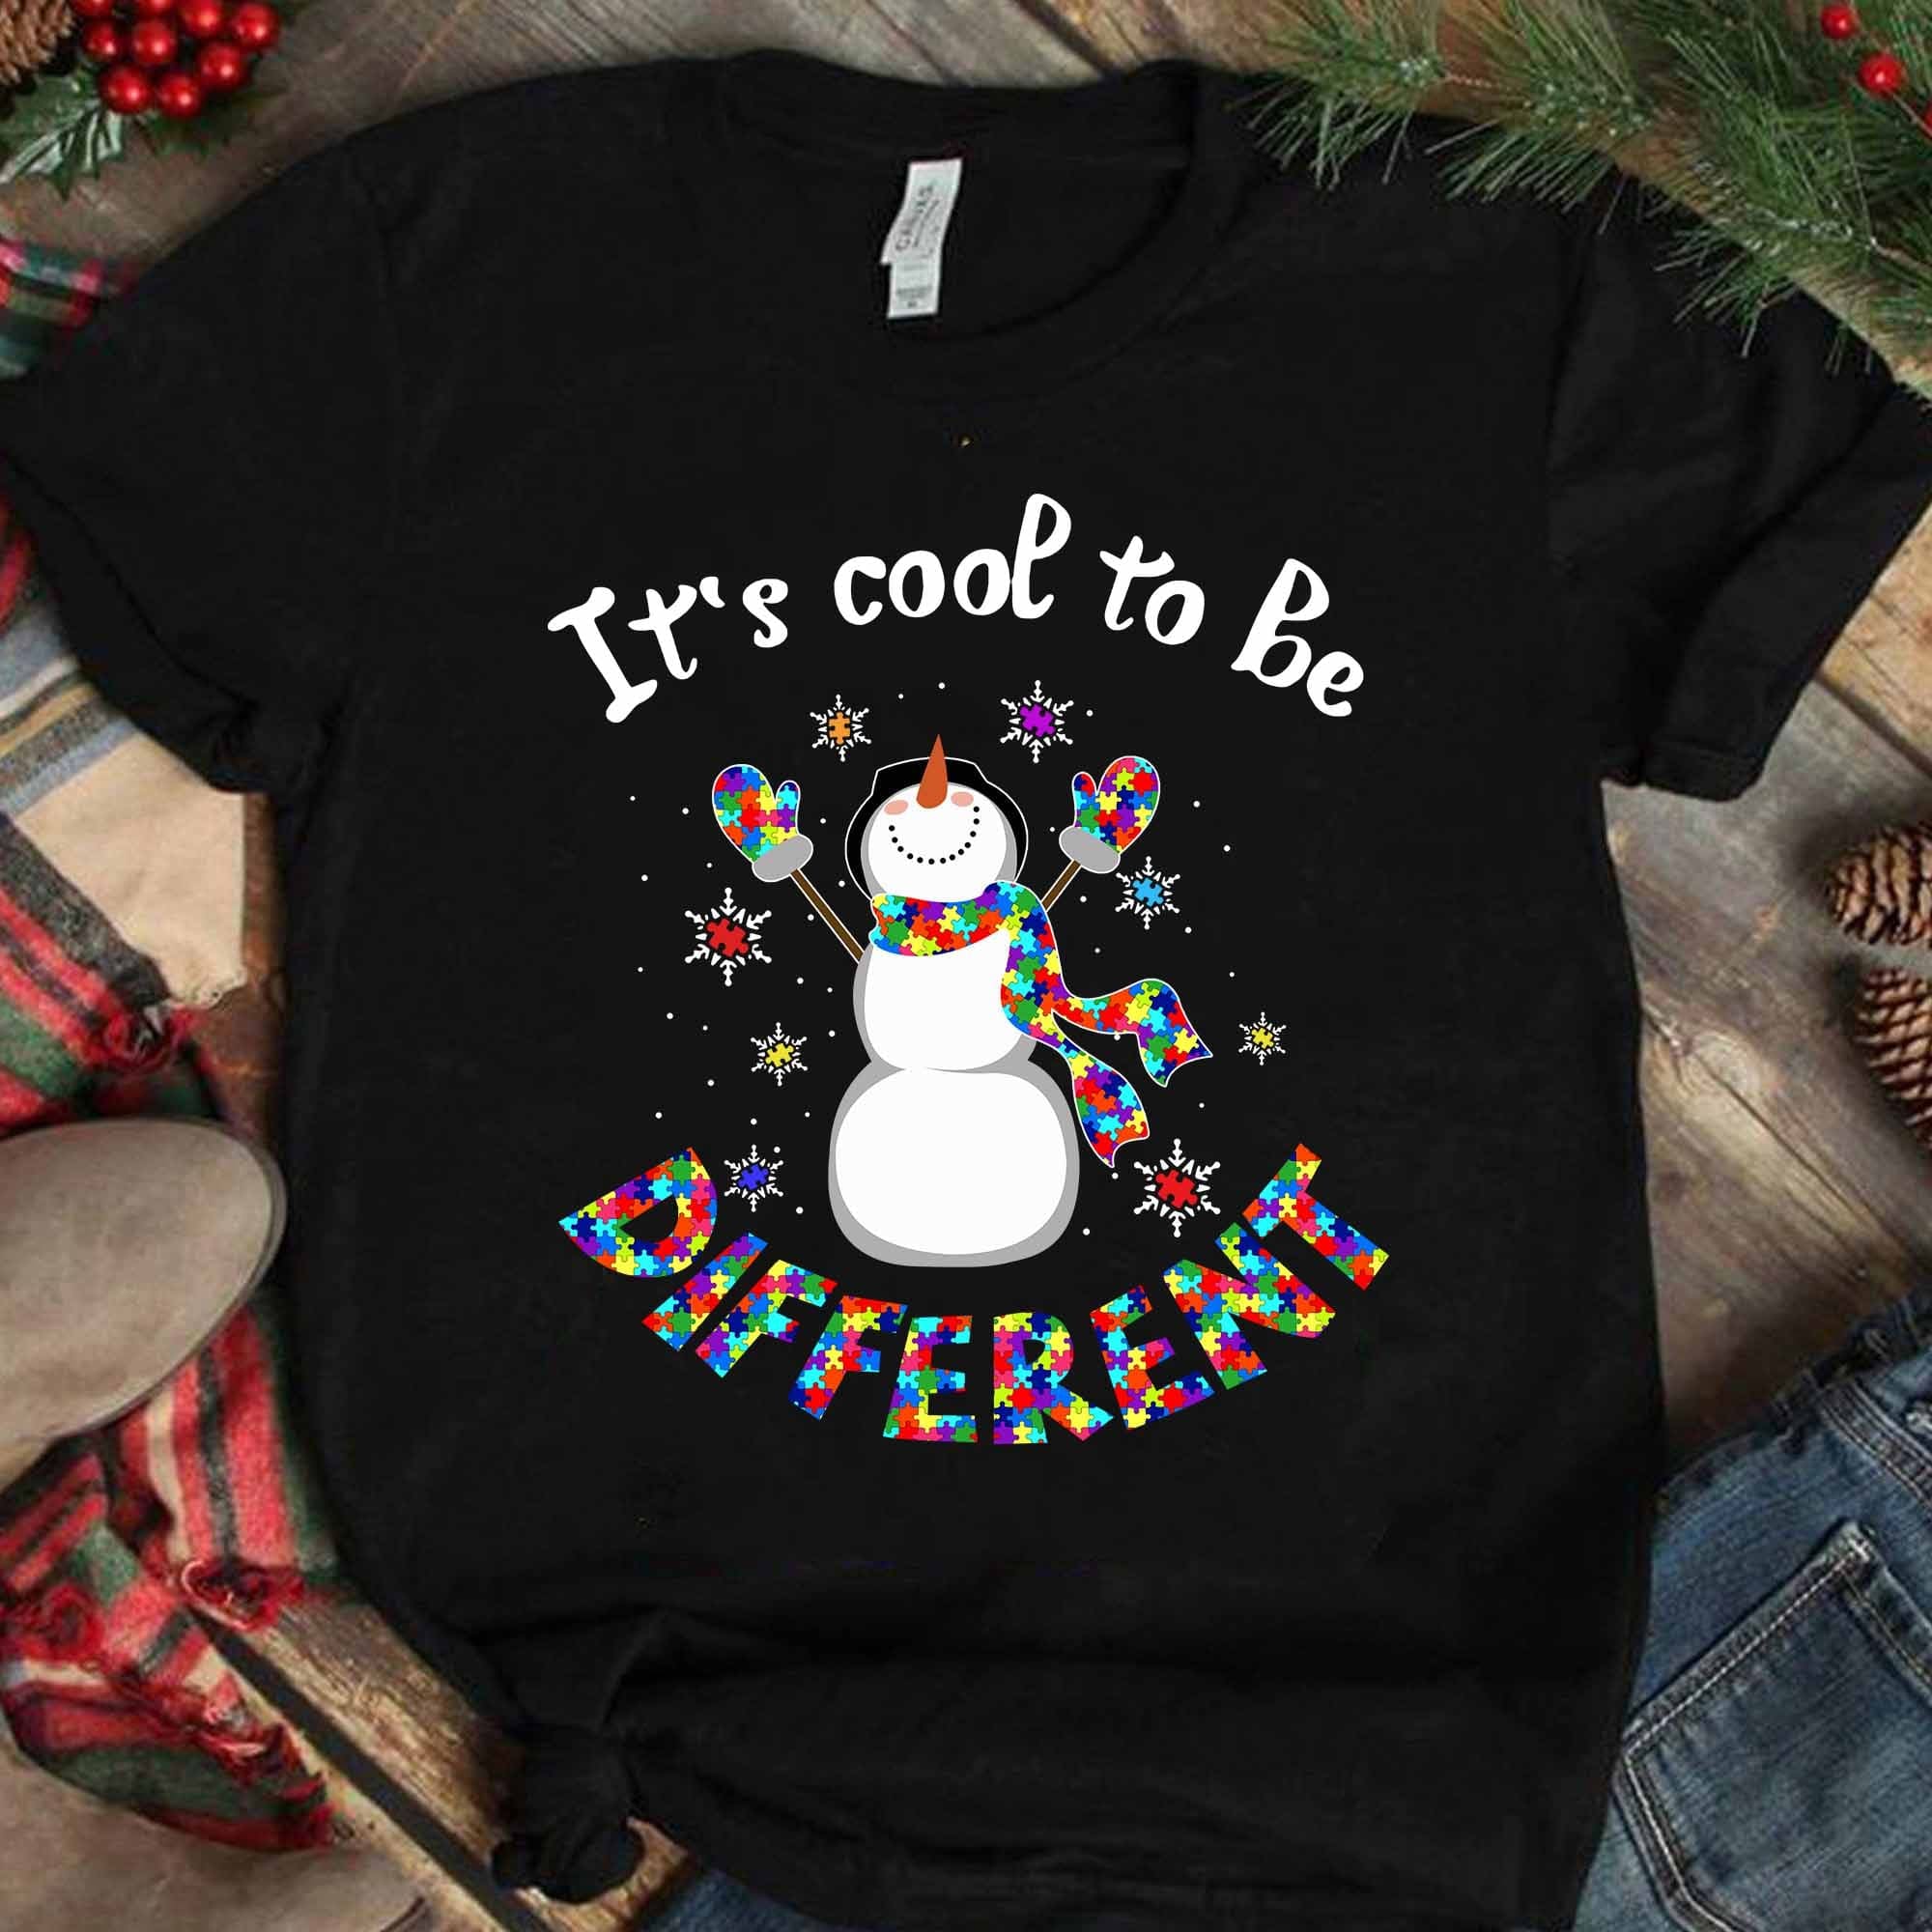 It's cool to be different - Autism awareness, Christmas autism snowman